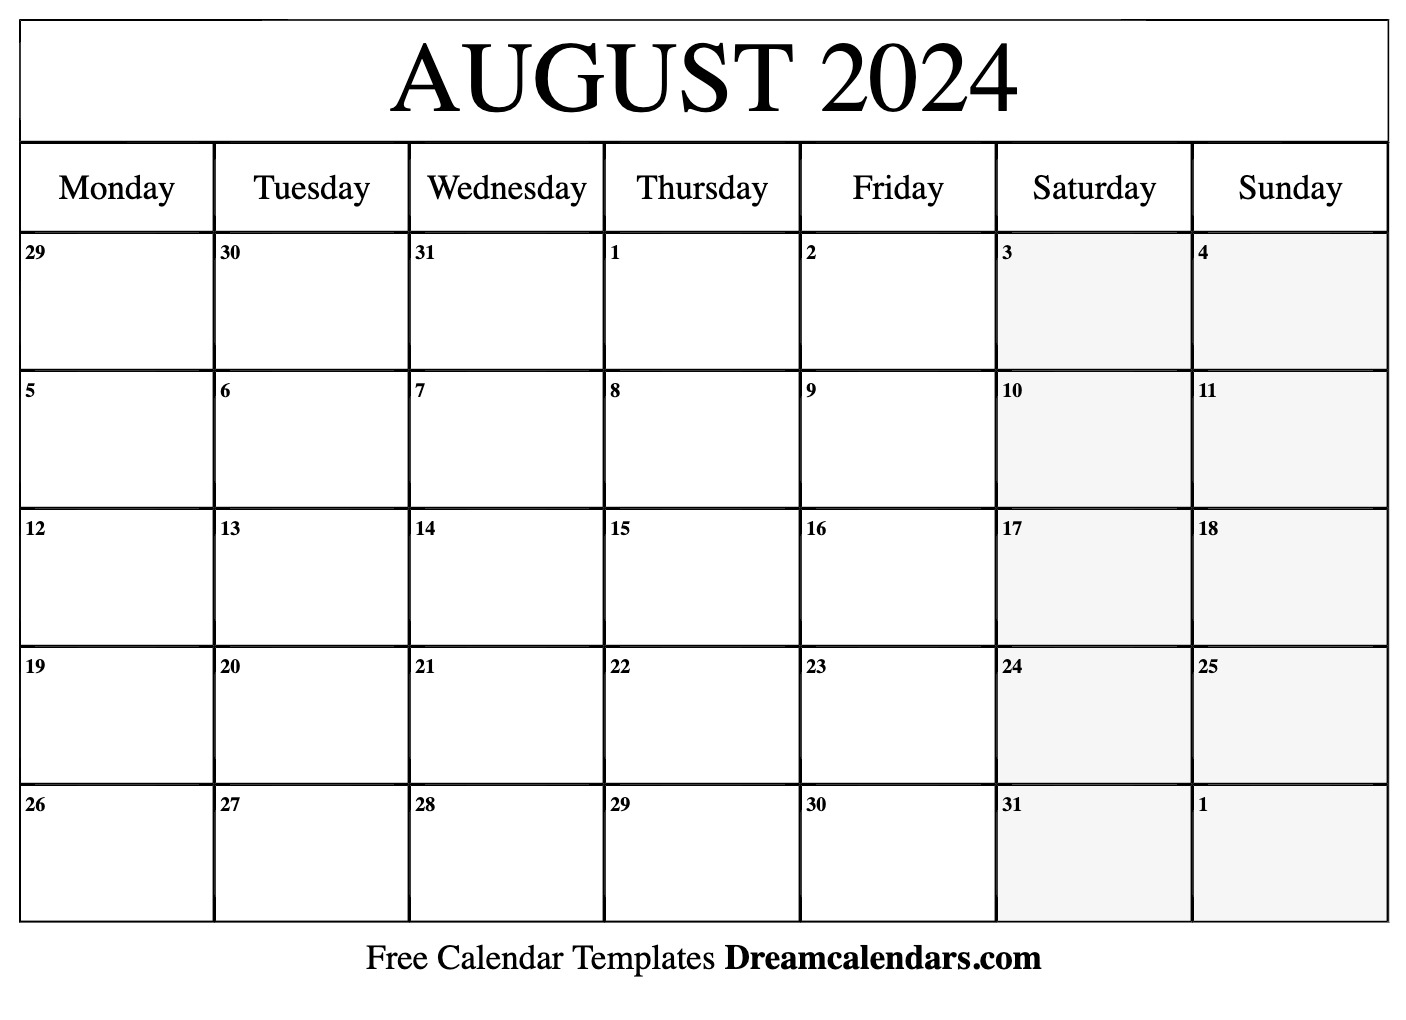 August 2024 Calendar | Free Blank Printable With Holidays for Free Printable Monthly Calendar August 2024